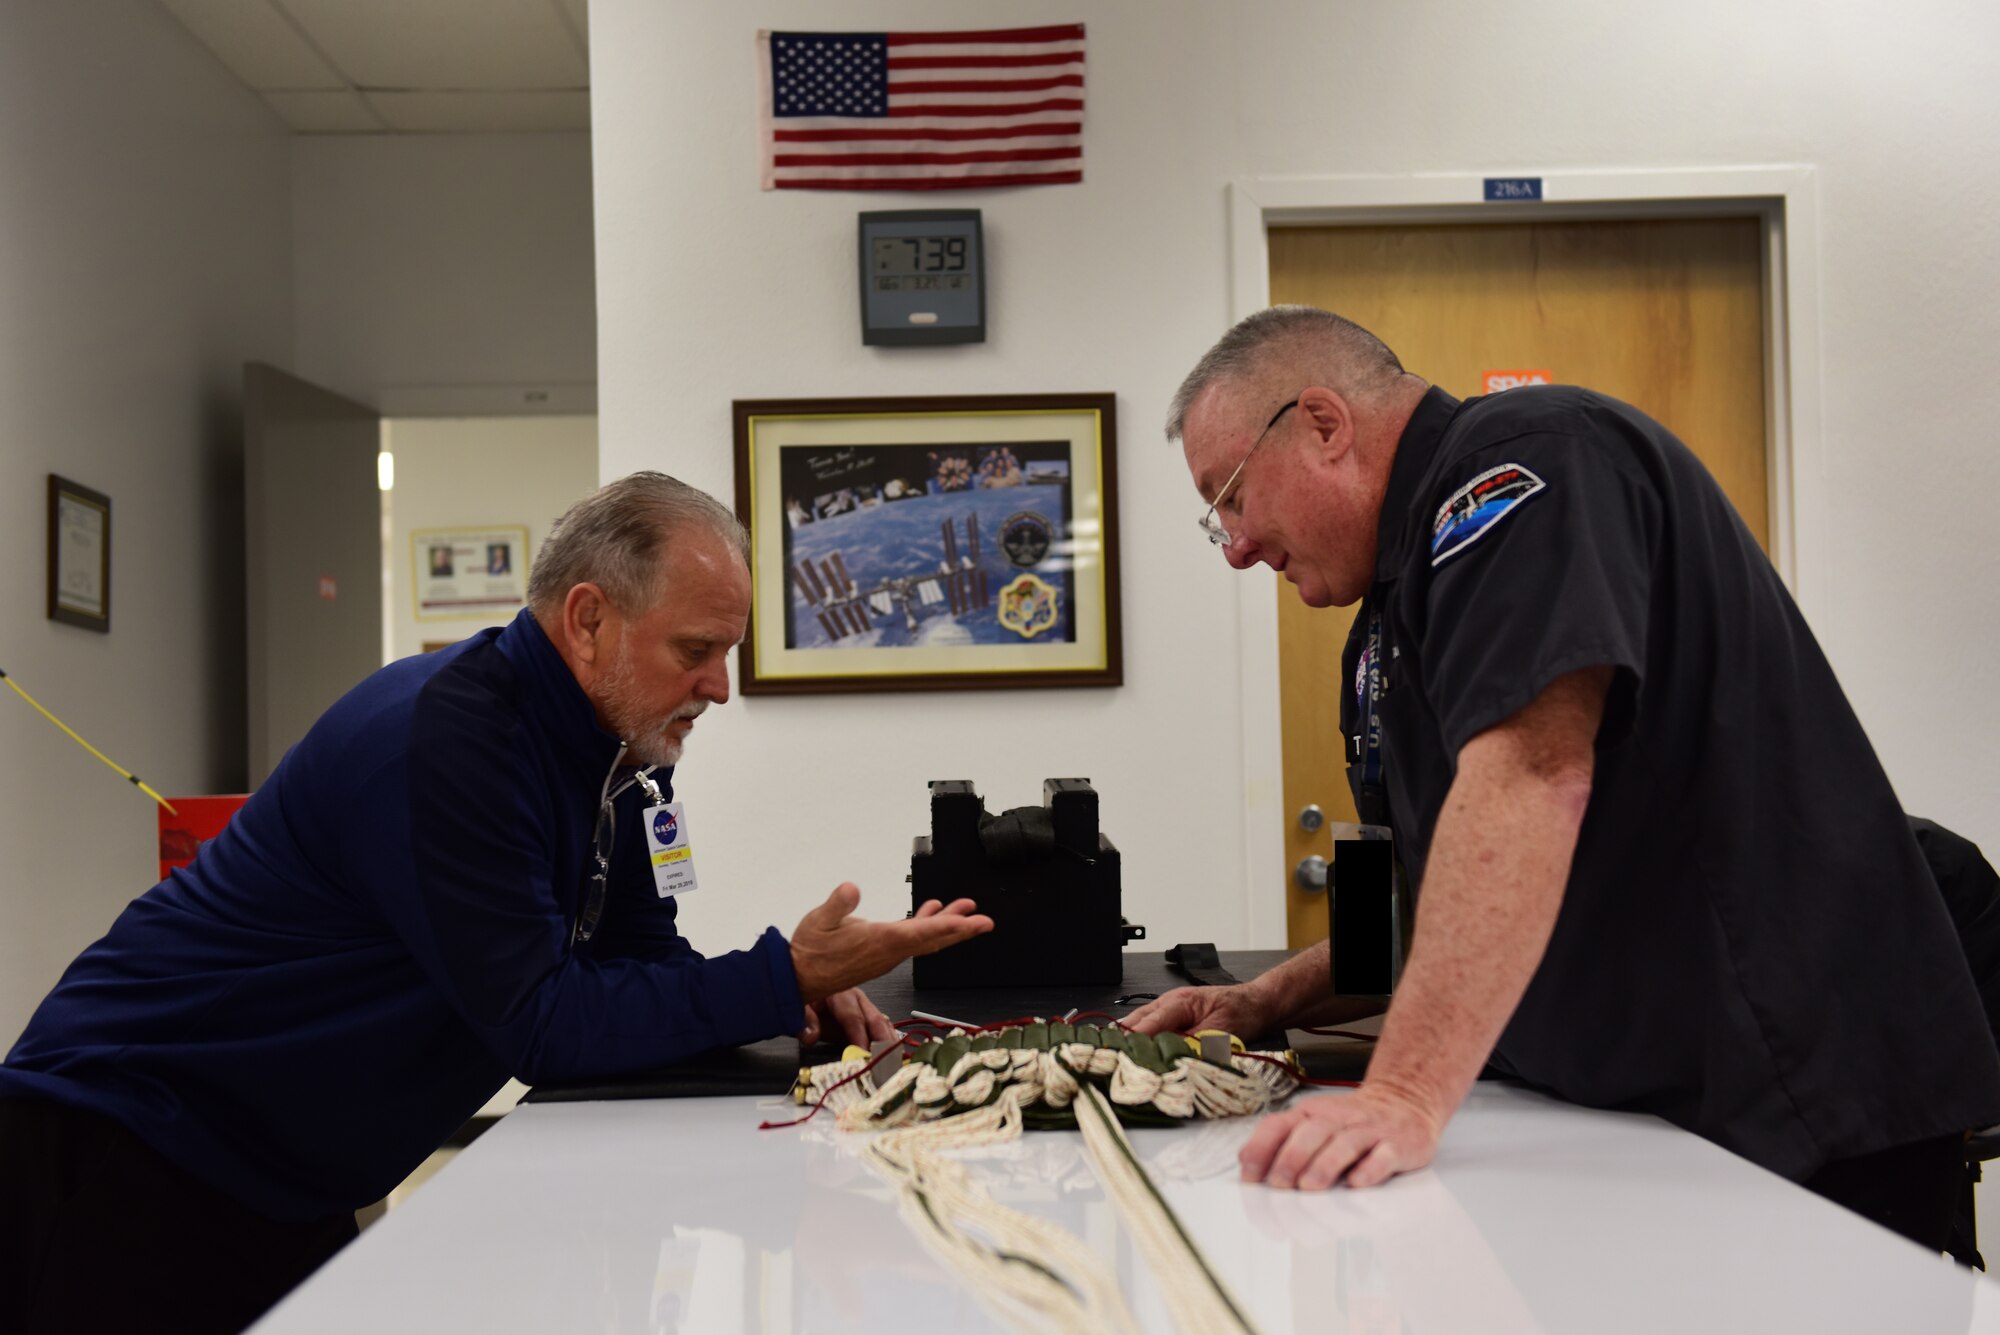 Tommy Sondag, 47th Operations Support Squadron aircrew flight equipment parachute technician, and Troy Stewart, a personal equipment technician contractor for NASA Aircraft Operations, discuss the process of stowing parachute lines at Ellington Airport, Texas, March 27, 2019. Sondag visited NASA's Aircraft Operations T-38 life support to assist in the newly revamped T-38 parachute packing procedures. During his visit, he was given a tour of the NASA facilities in the area. (U.S. Air Force photo by Senior Airman Benjamin N. Valmoja)